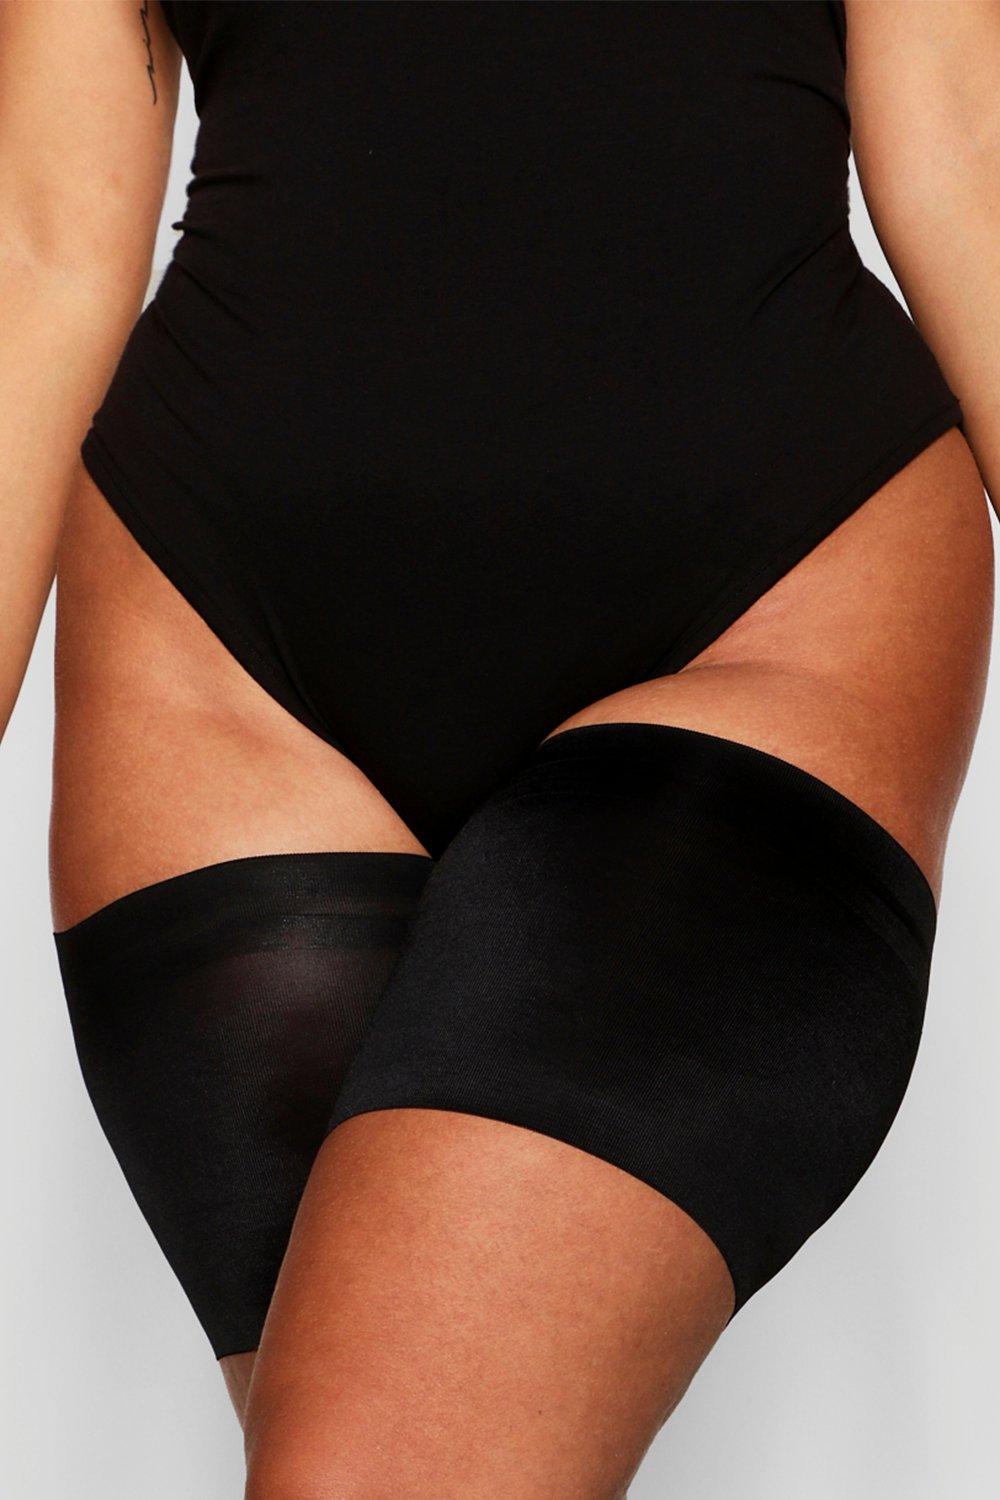 Boohoo Plus 2 Pack Anti Chafing Thigh Bands- Black  - Size: 22